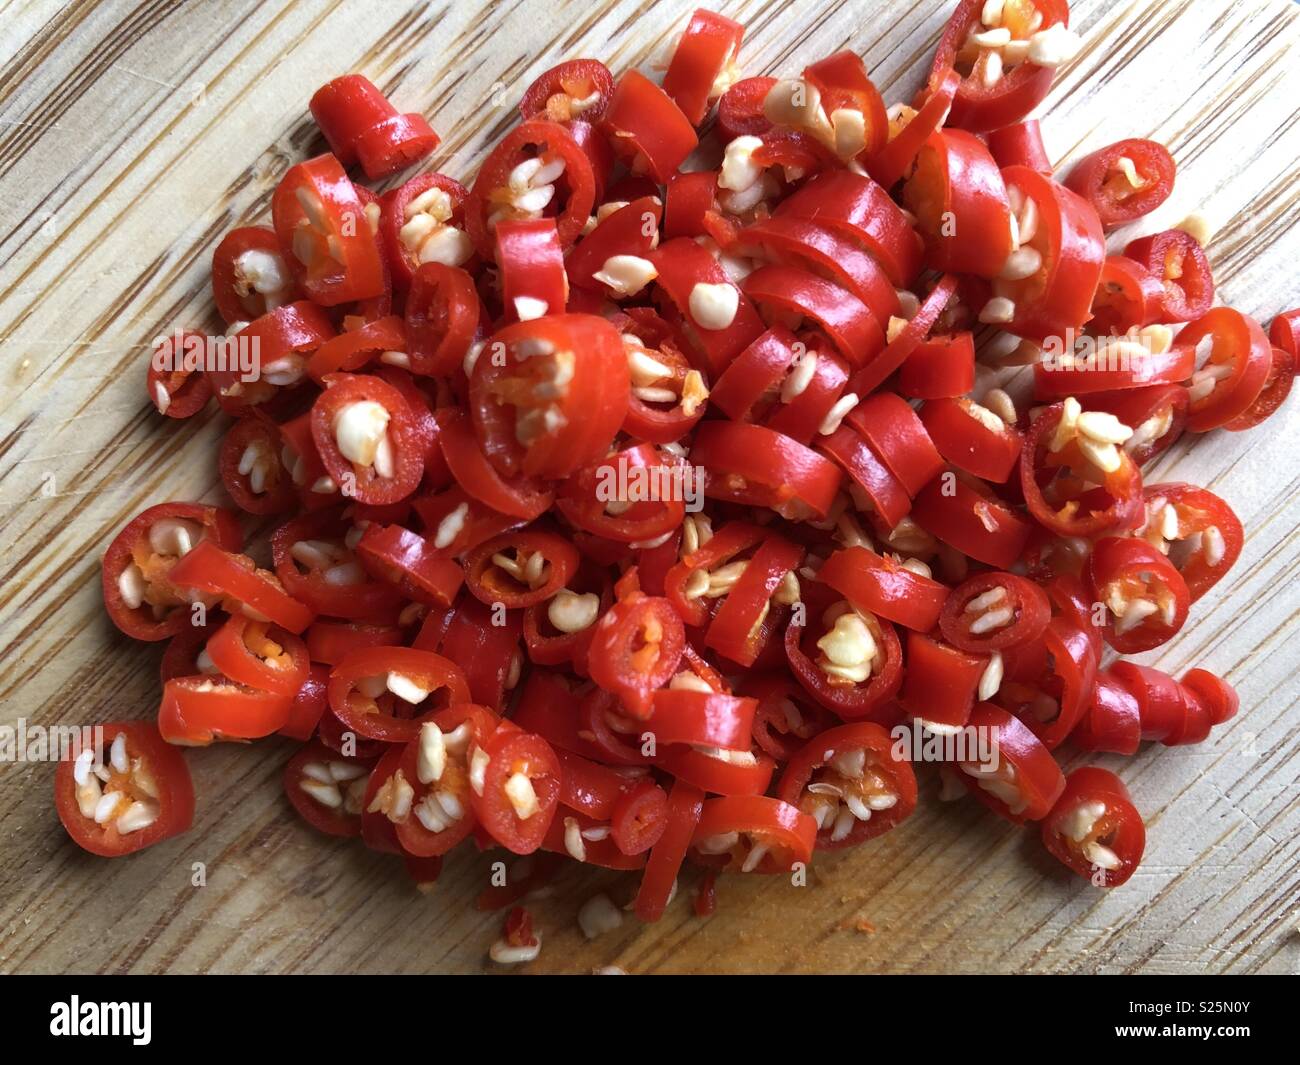 Chopped red chillies on wooden chopping board Stock Photo